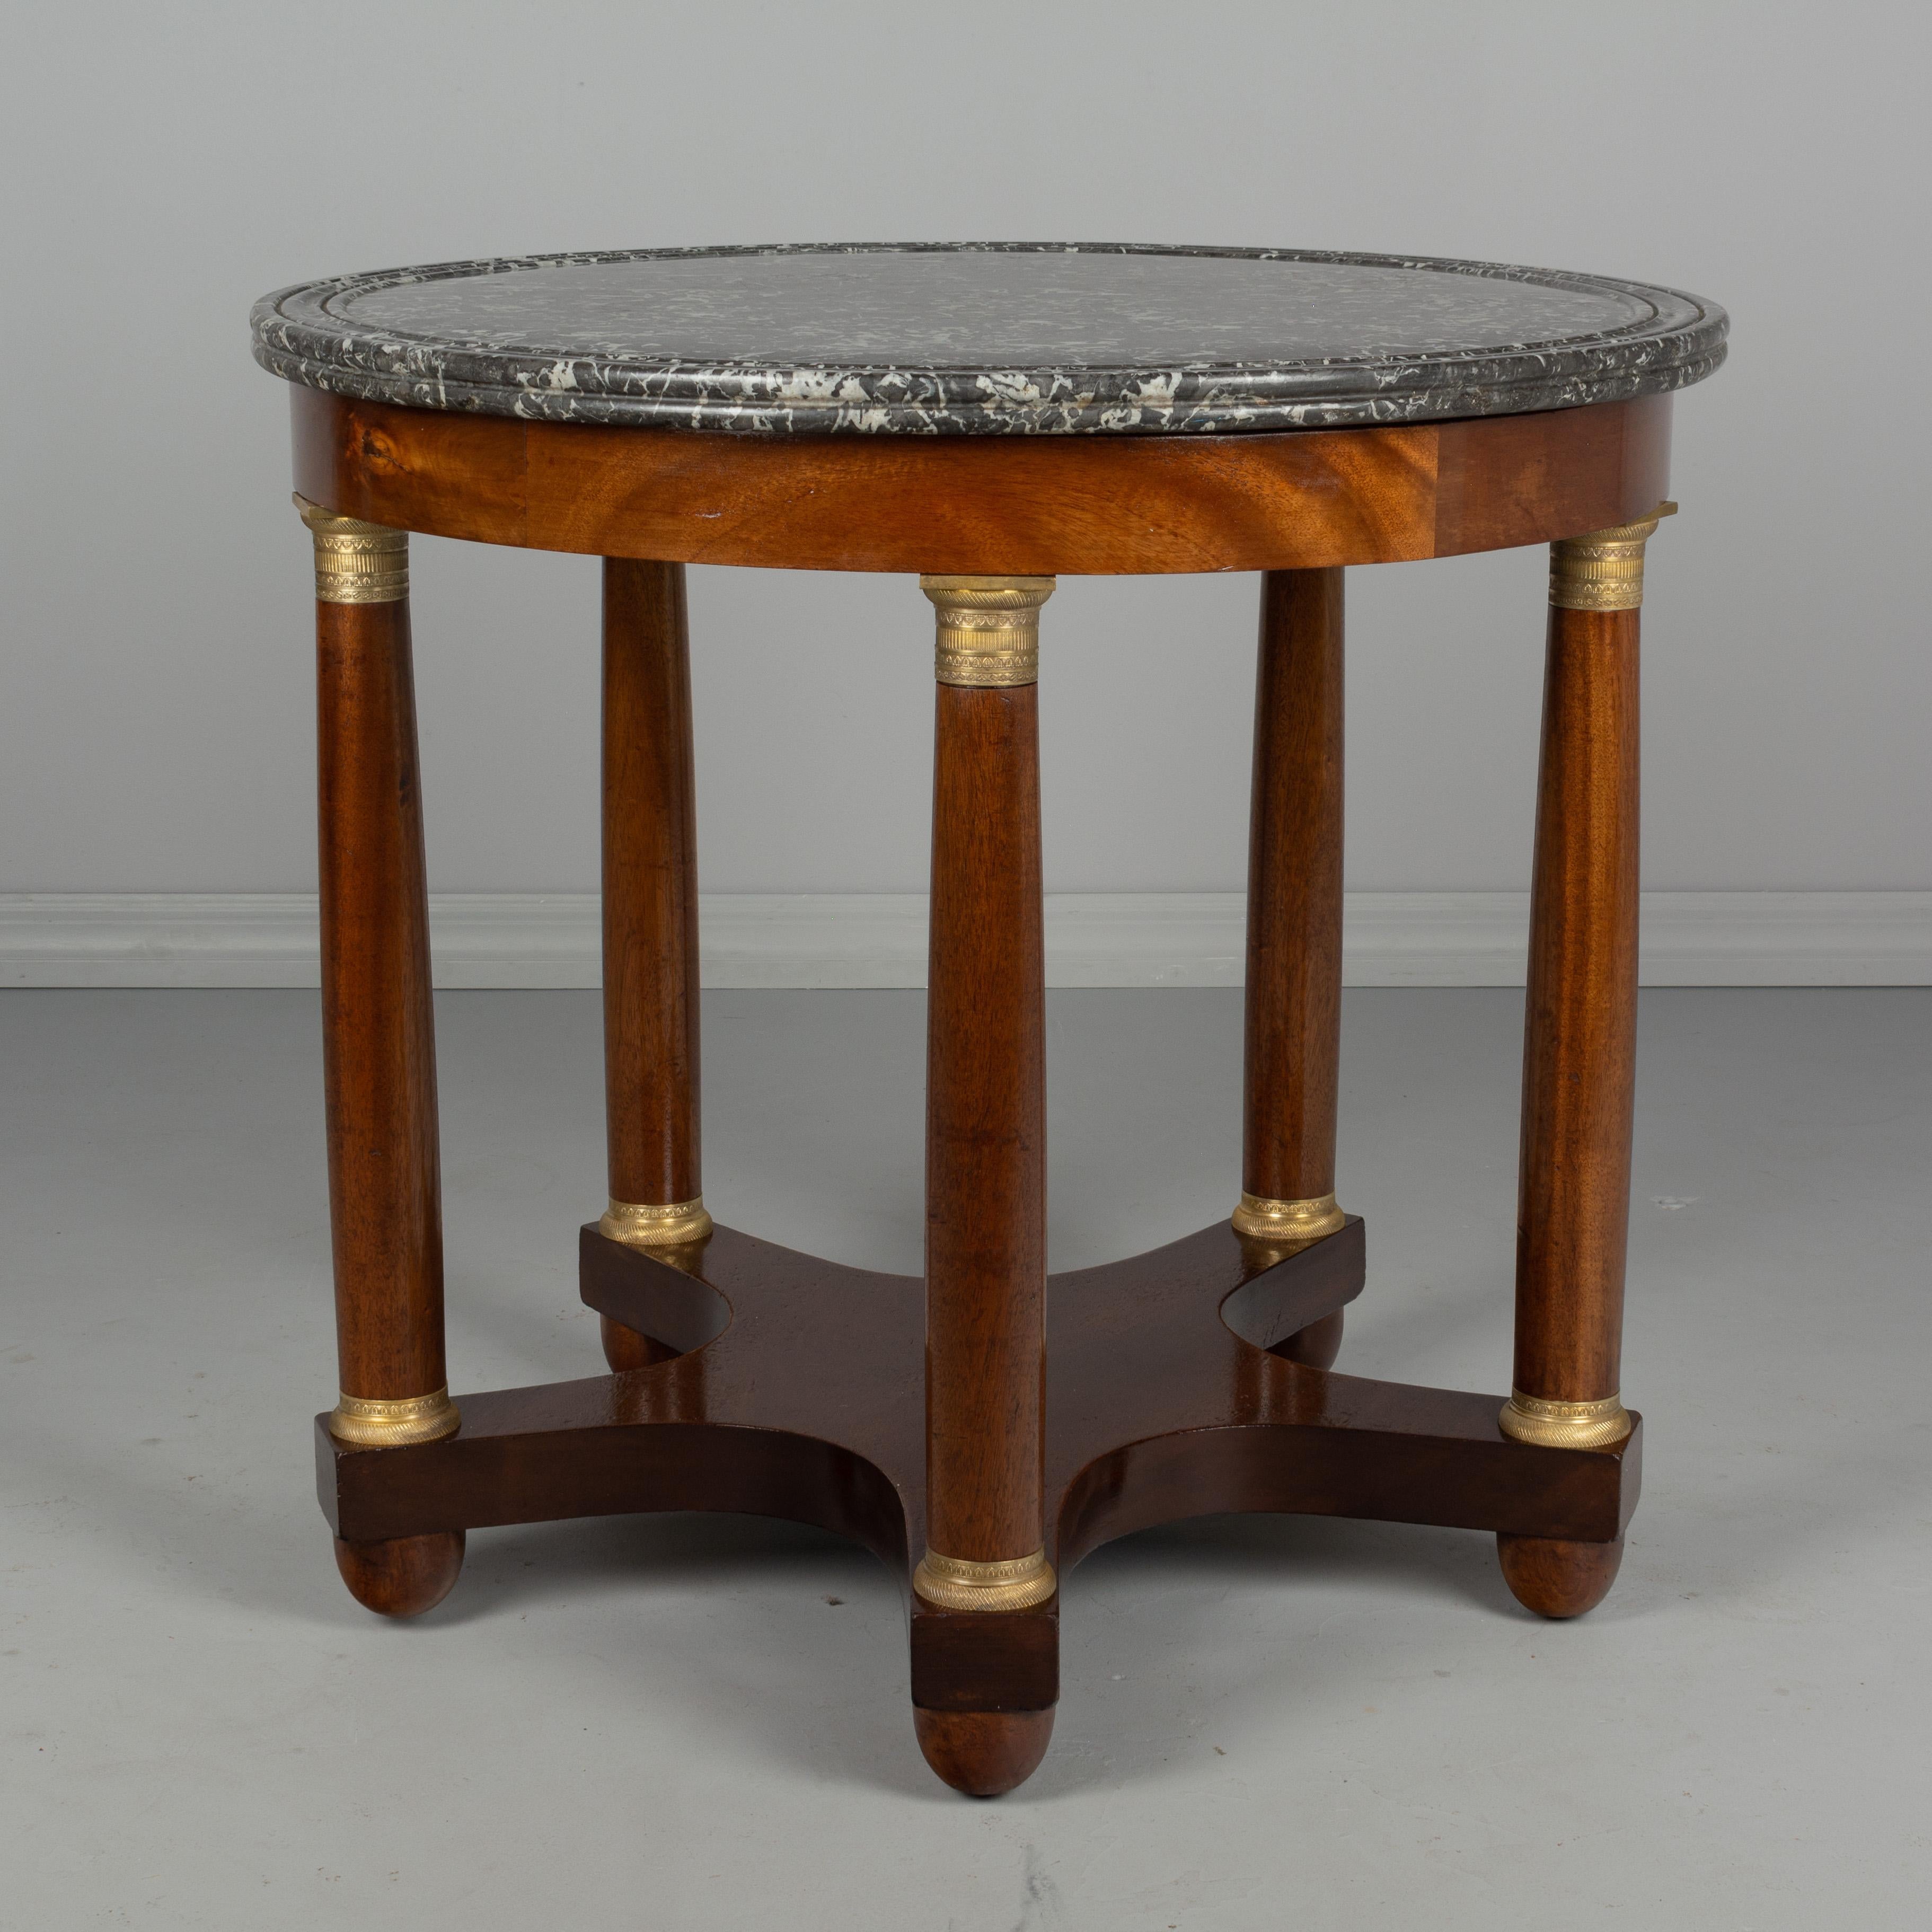 Hand-Crafted 19th Century French Mahogany Gueridon or Center Table